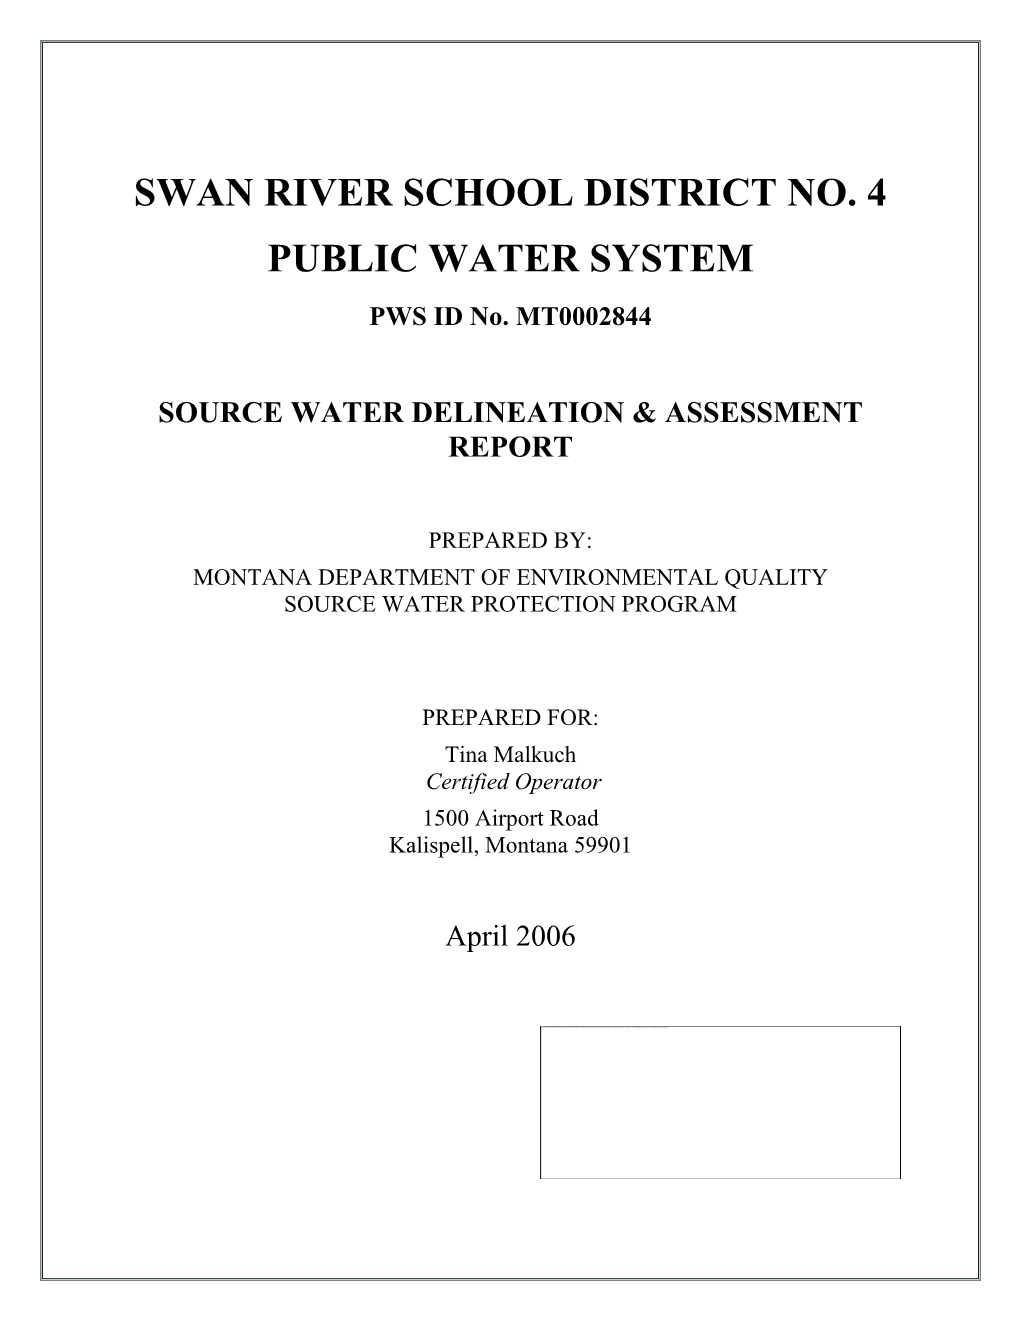 Source Water Assessment Swan River School District No. 4, Kalispell